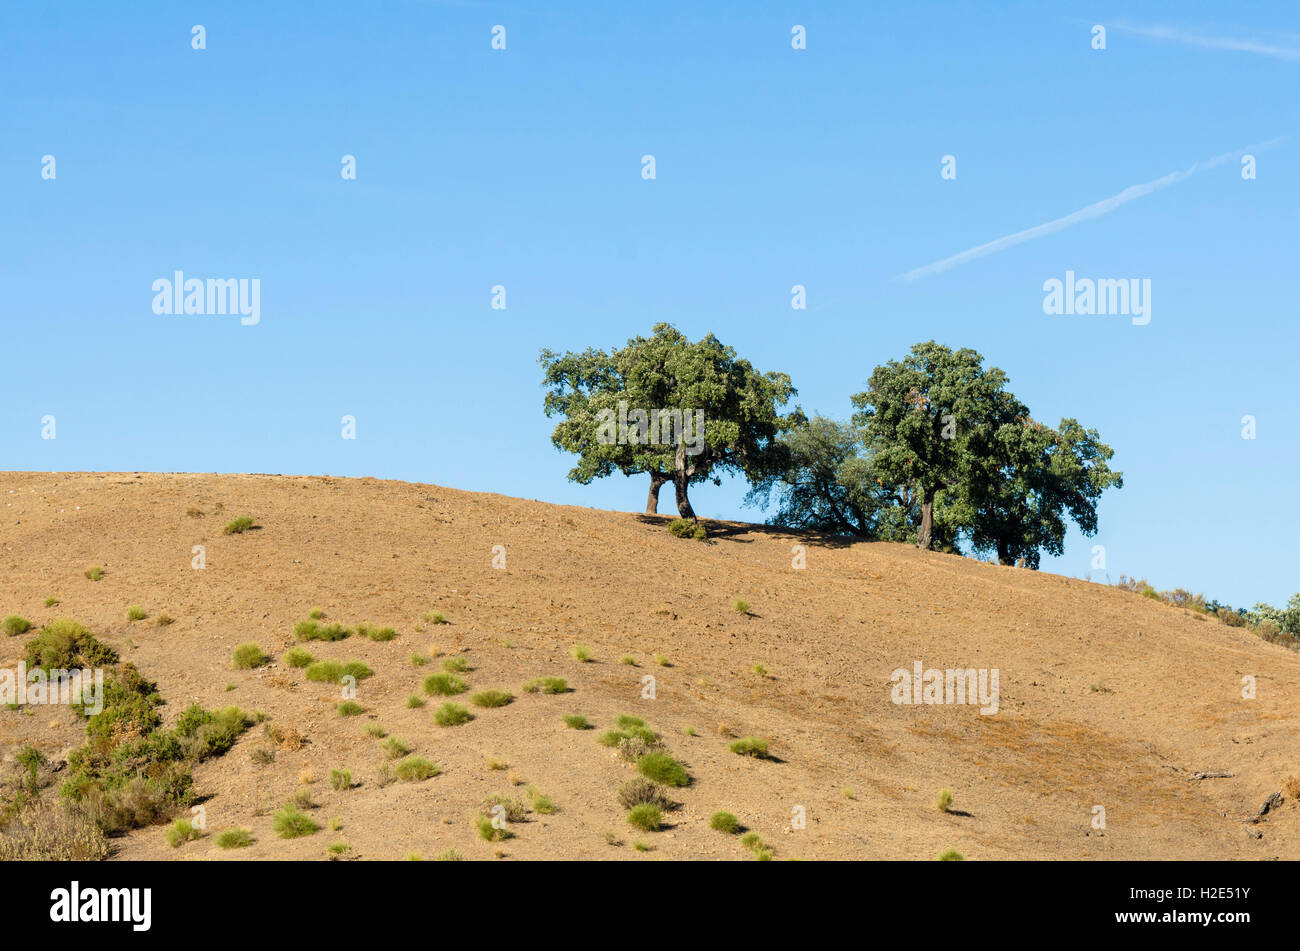 Dry spanish scrubland and farmland, landscape in southern Spain with some cork oaks, Andalusia. Stock Photo